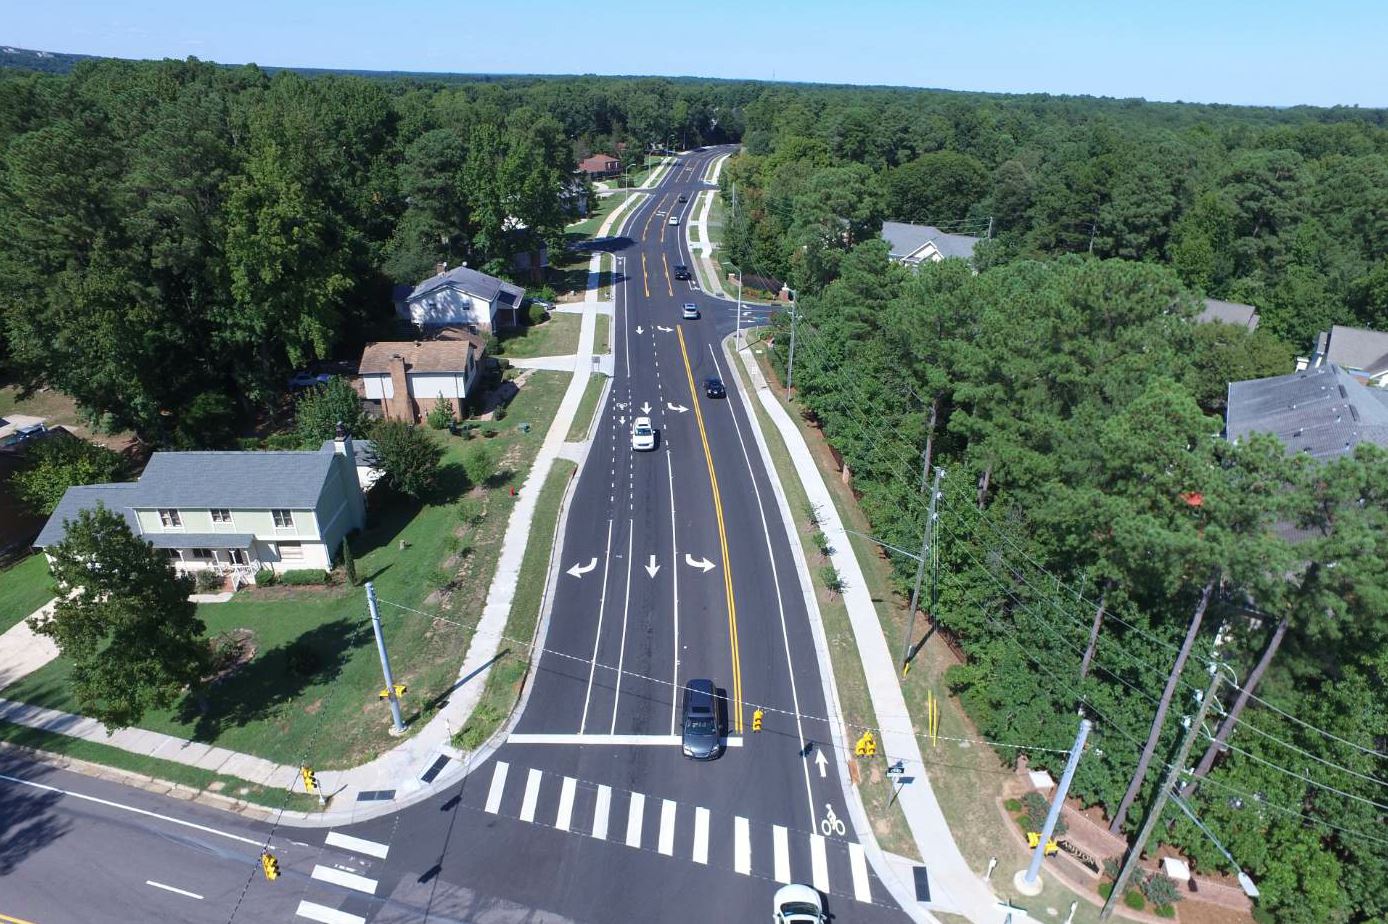 Sandy Forks Road was originally built in the 1970s as a two-lane connector road in North Raleigh. Over time, homes and businesses began to develop alongside the 1.5-mile-long corridor.